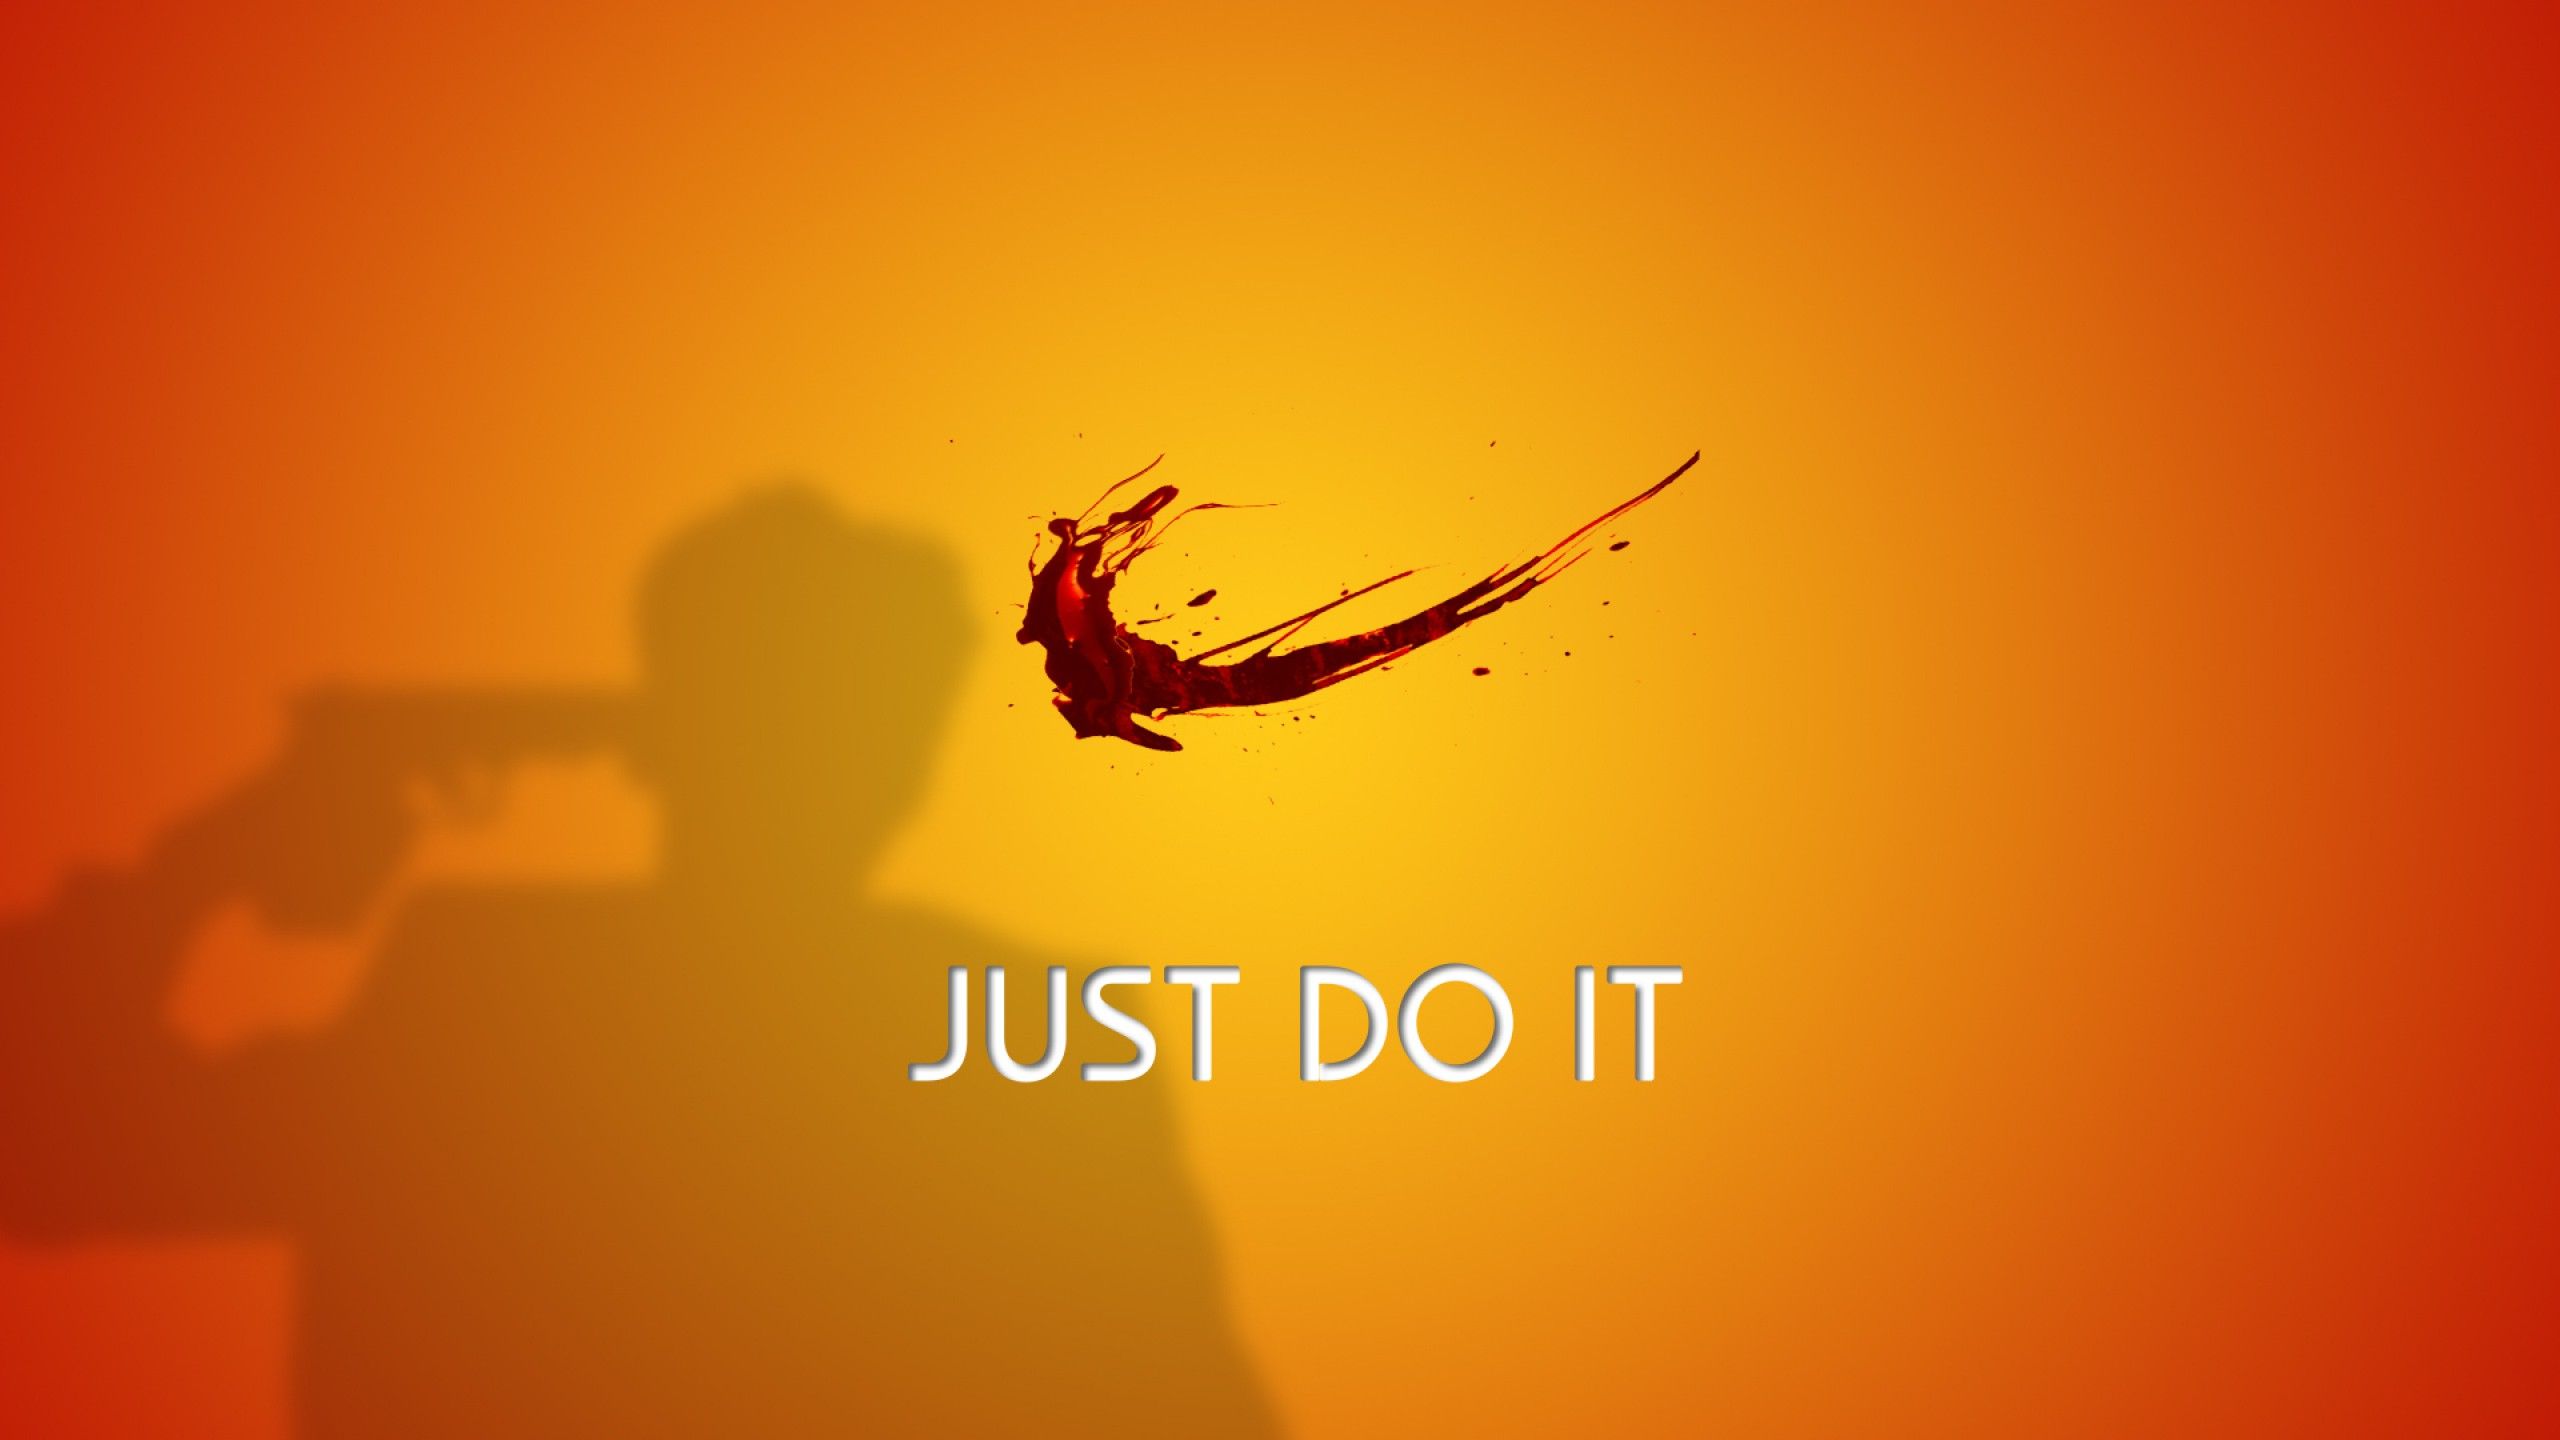 Wallpapers Suicide Just Do It Blood Nike Yellow 2560x1440 ...